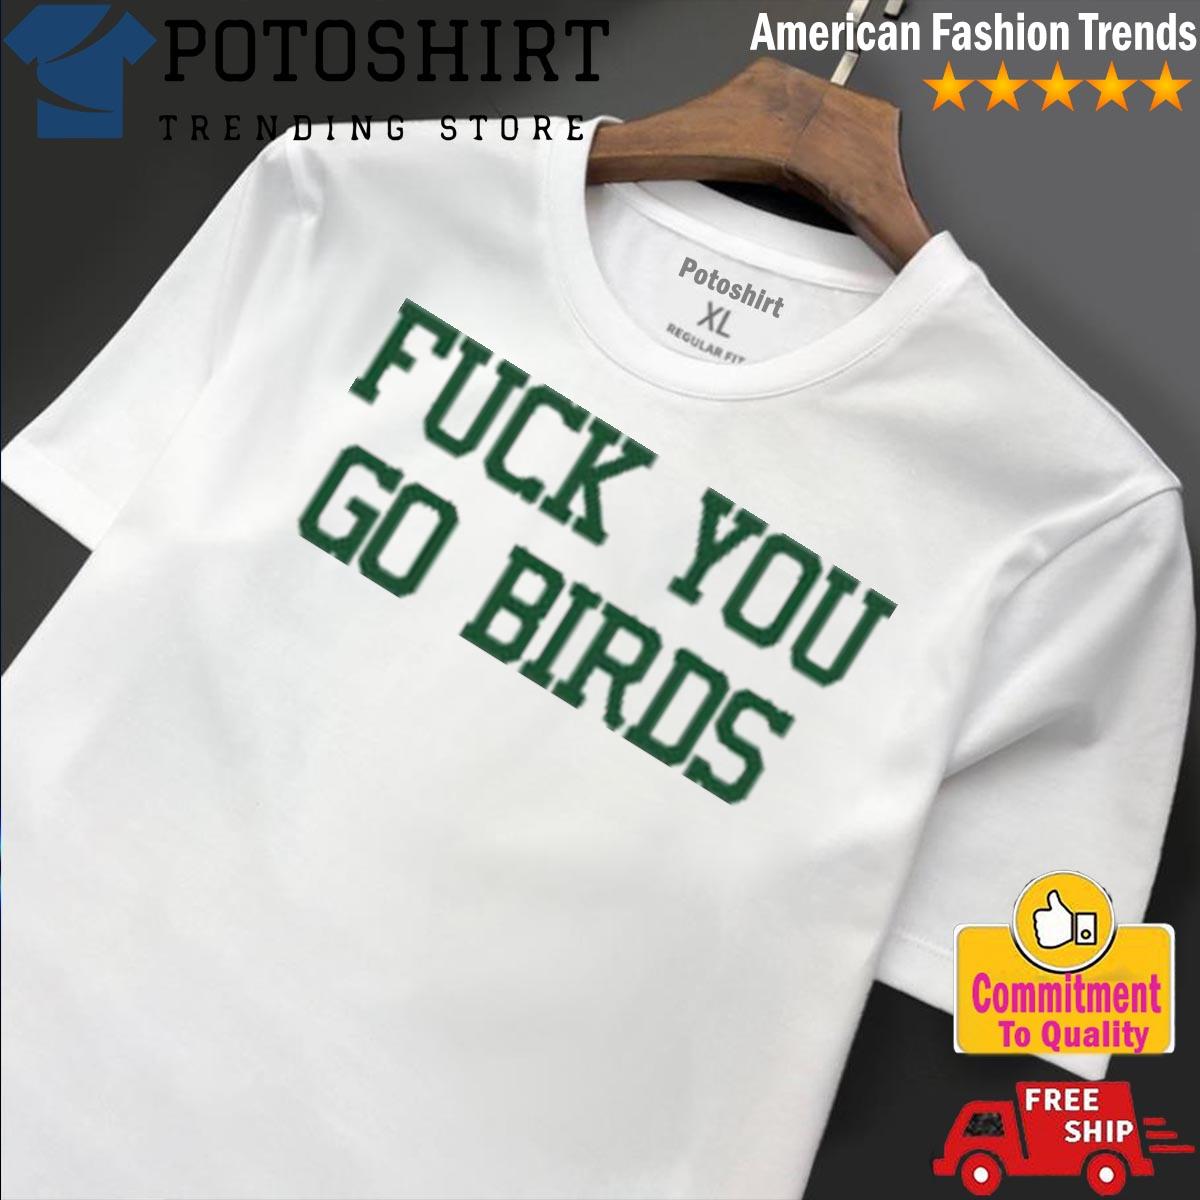 Fuck You Go Birds Shirt, hoodie, sweater and long sleeve